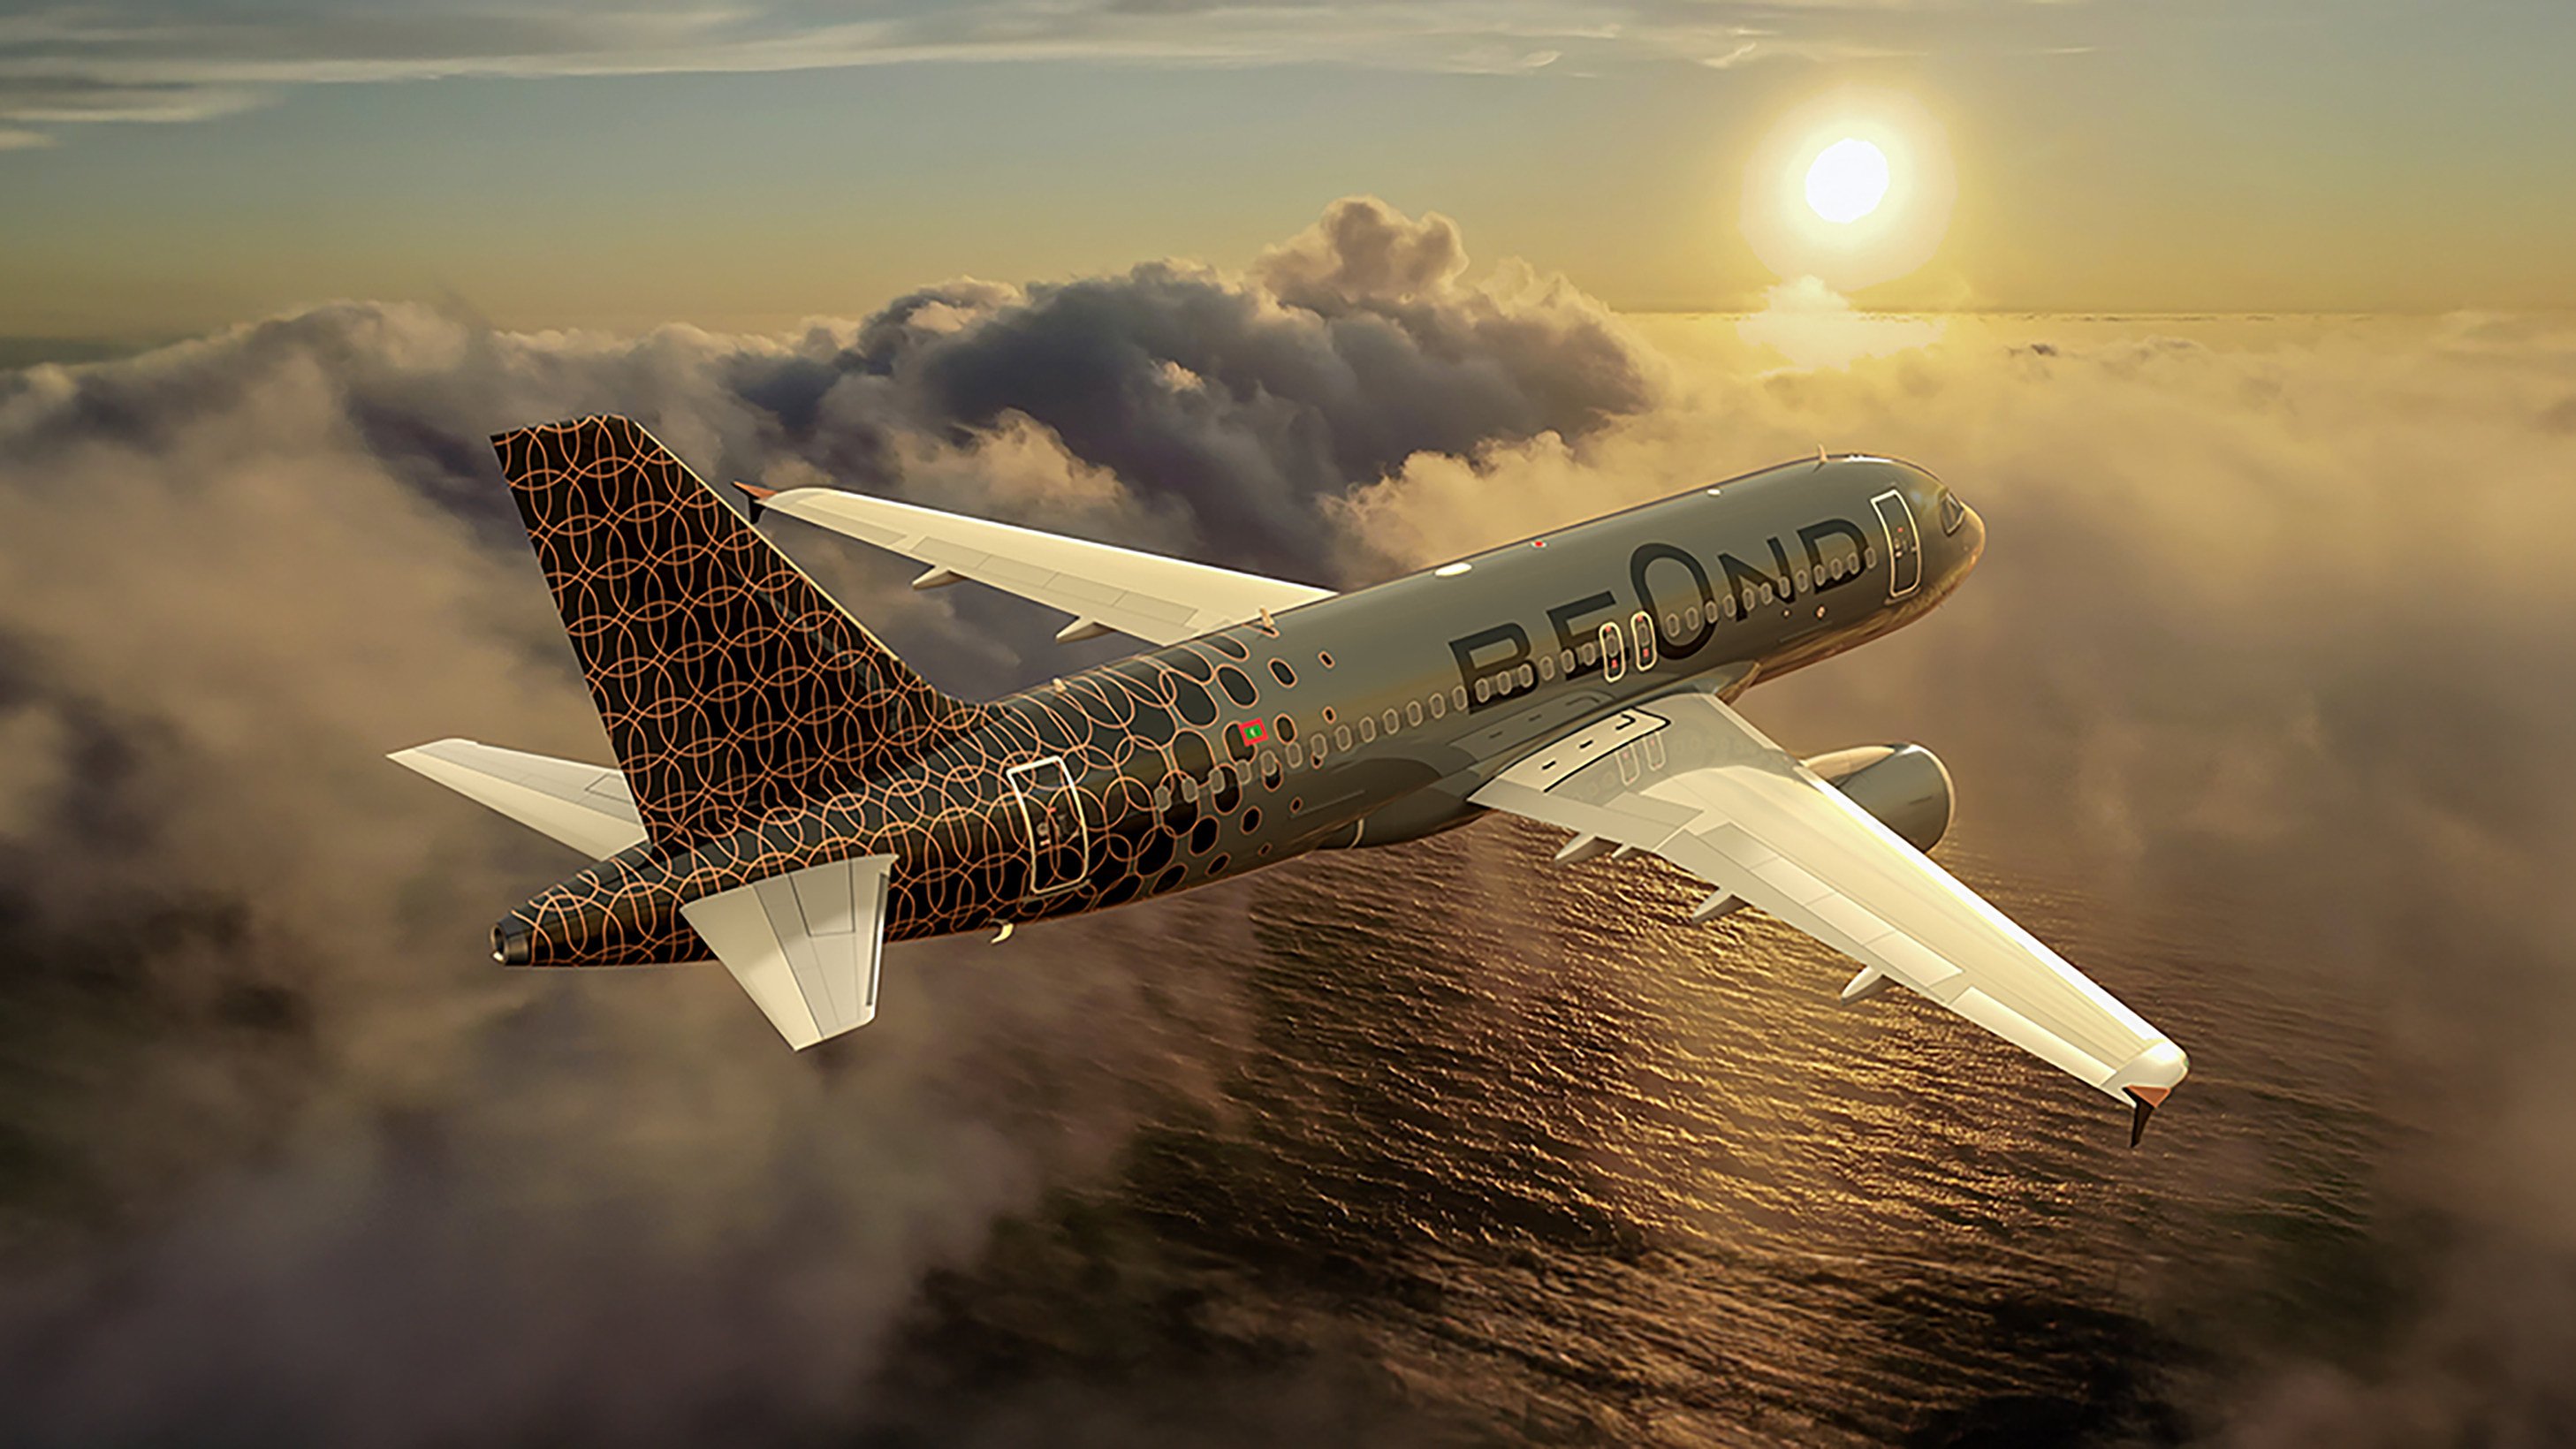 Beond, a new luxury airline from the Maldives, plans to fly to Hong Kong next year following its expected launch this autumn. Photo: Handout 